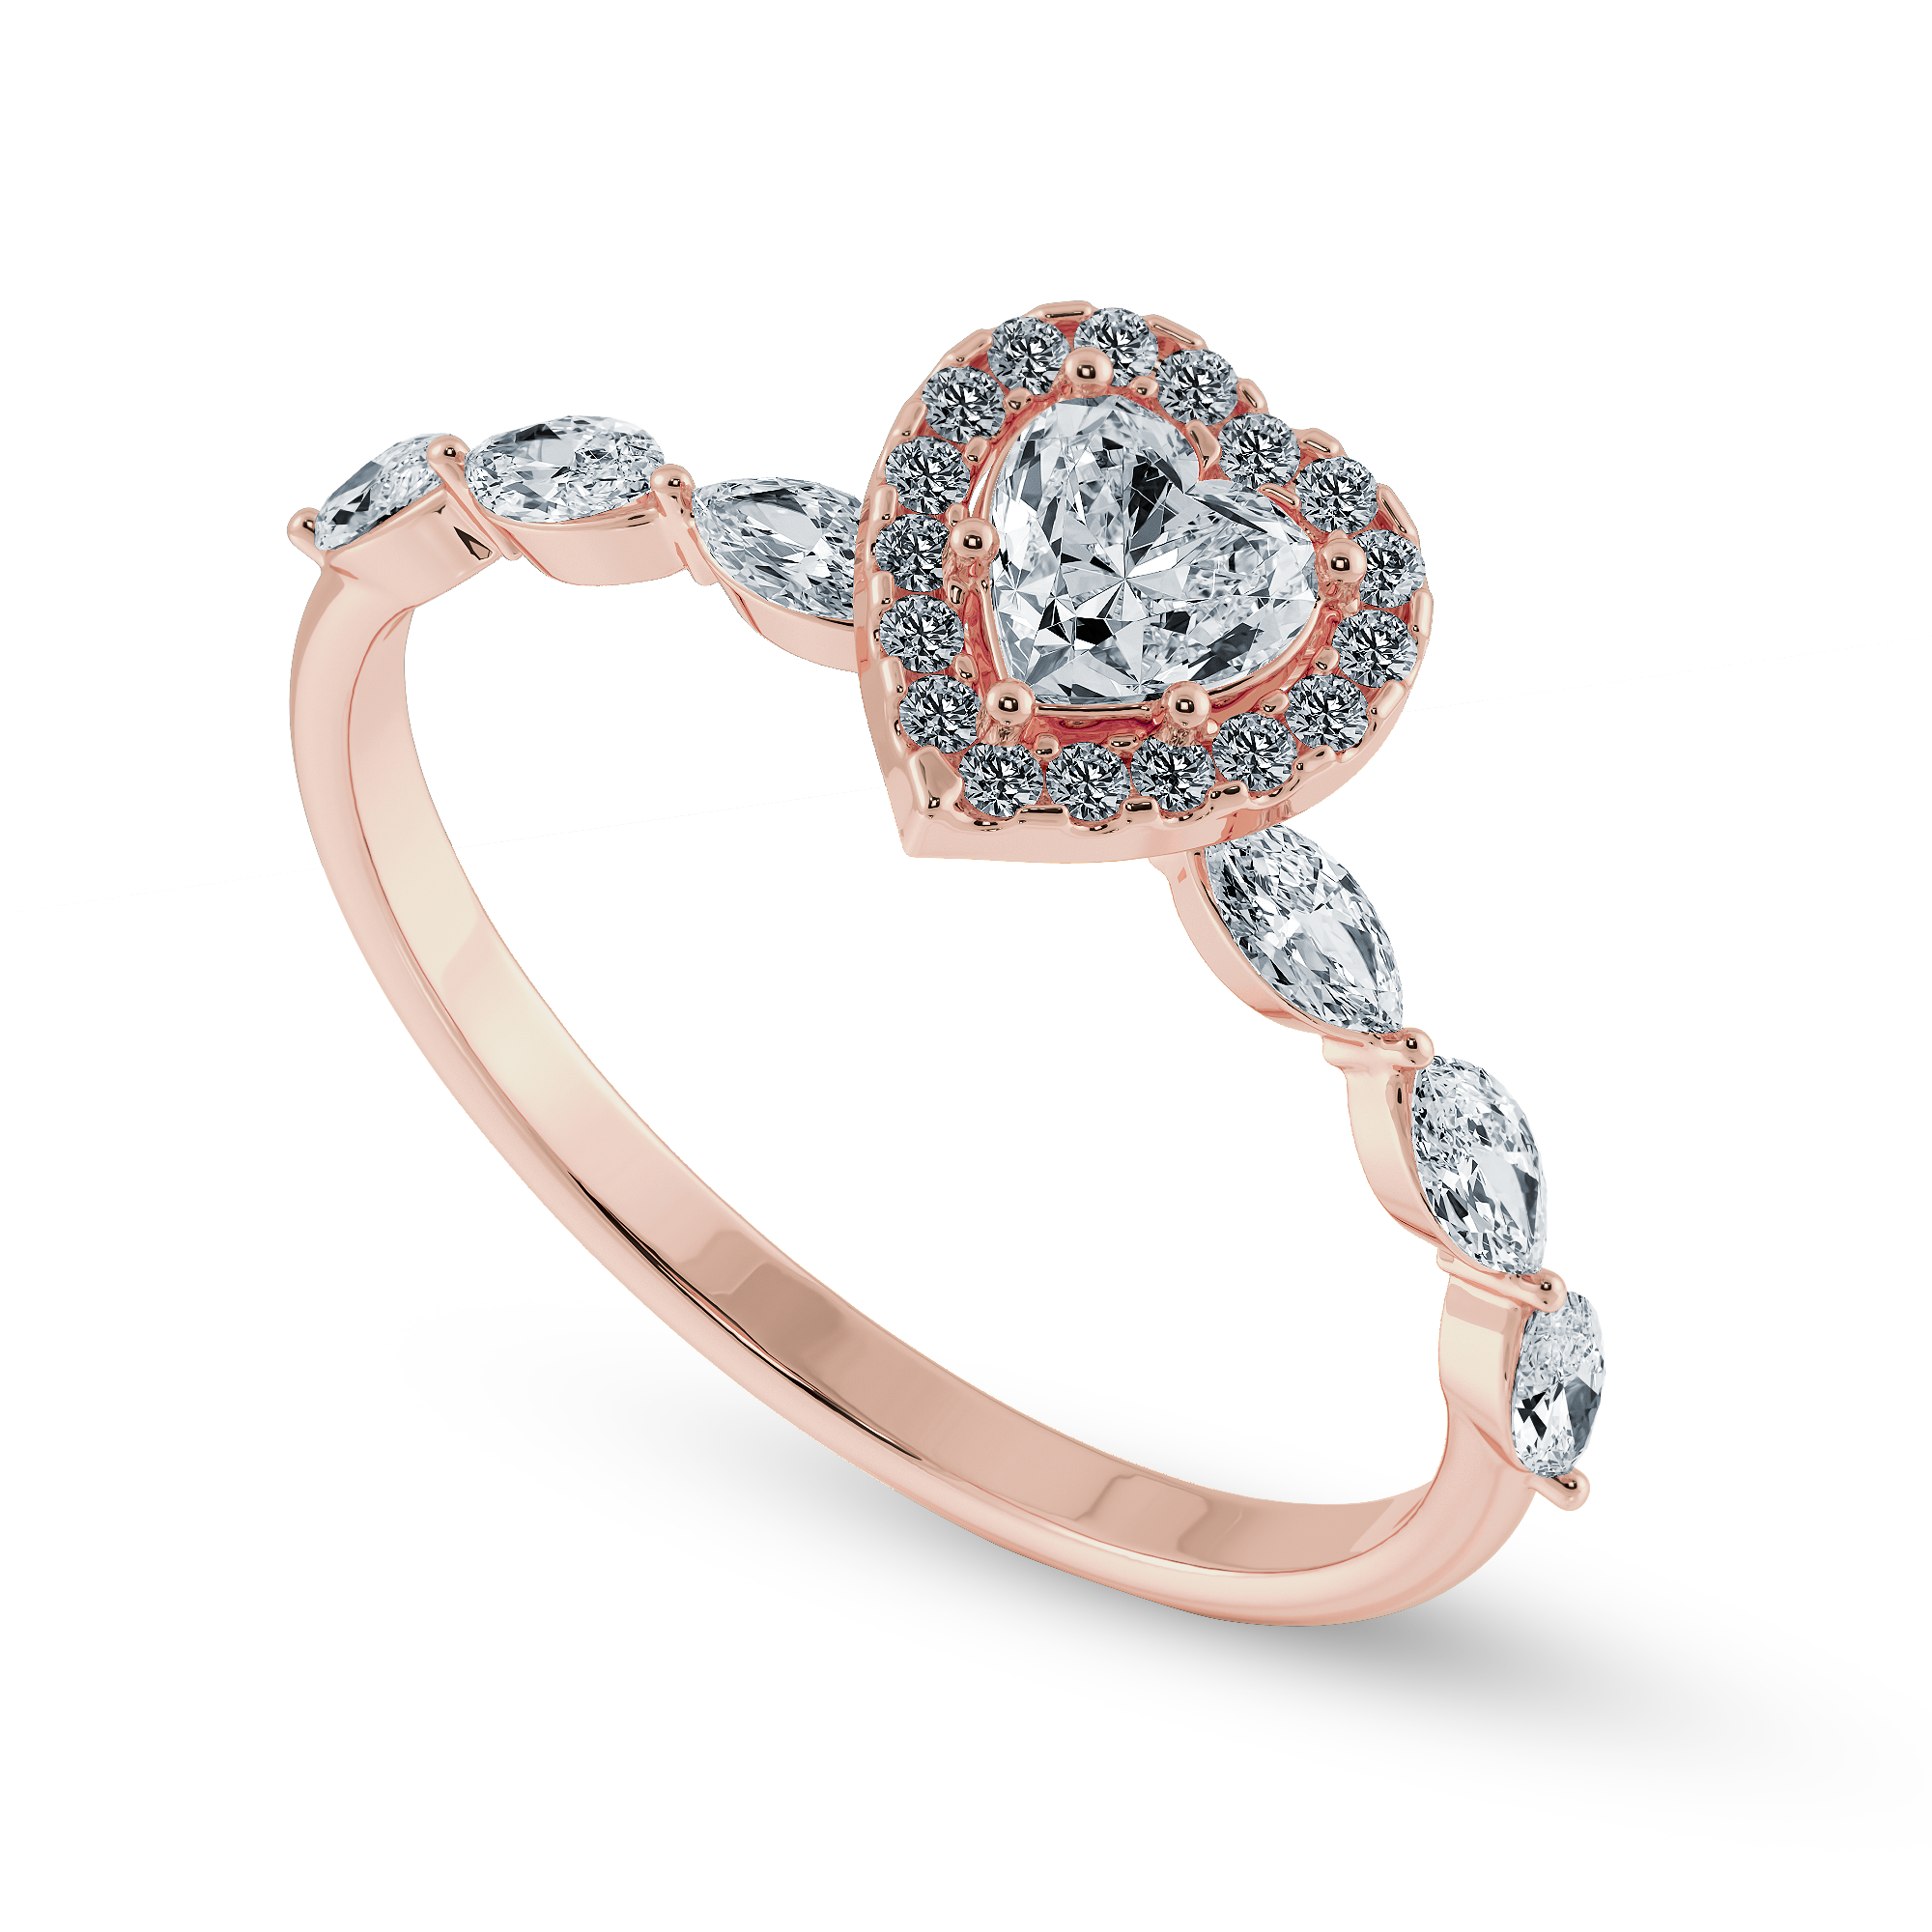 30-Pointer Heart Cut Solitaire Halo Diamonds with Marquise Diamonds Accents 18K Rose Gold Ring JL AU 1273R